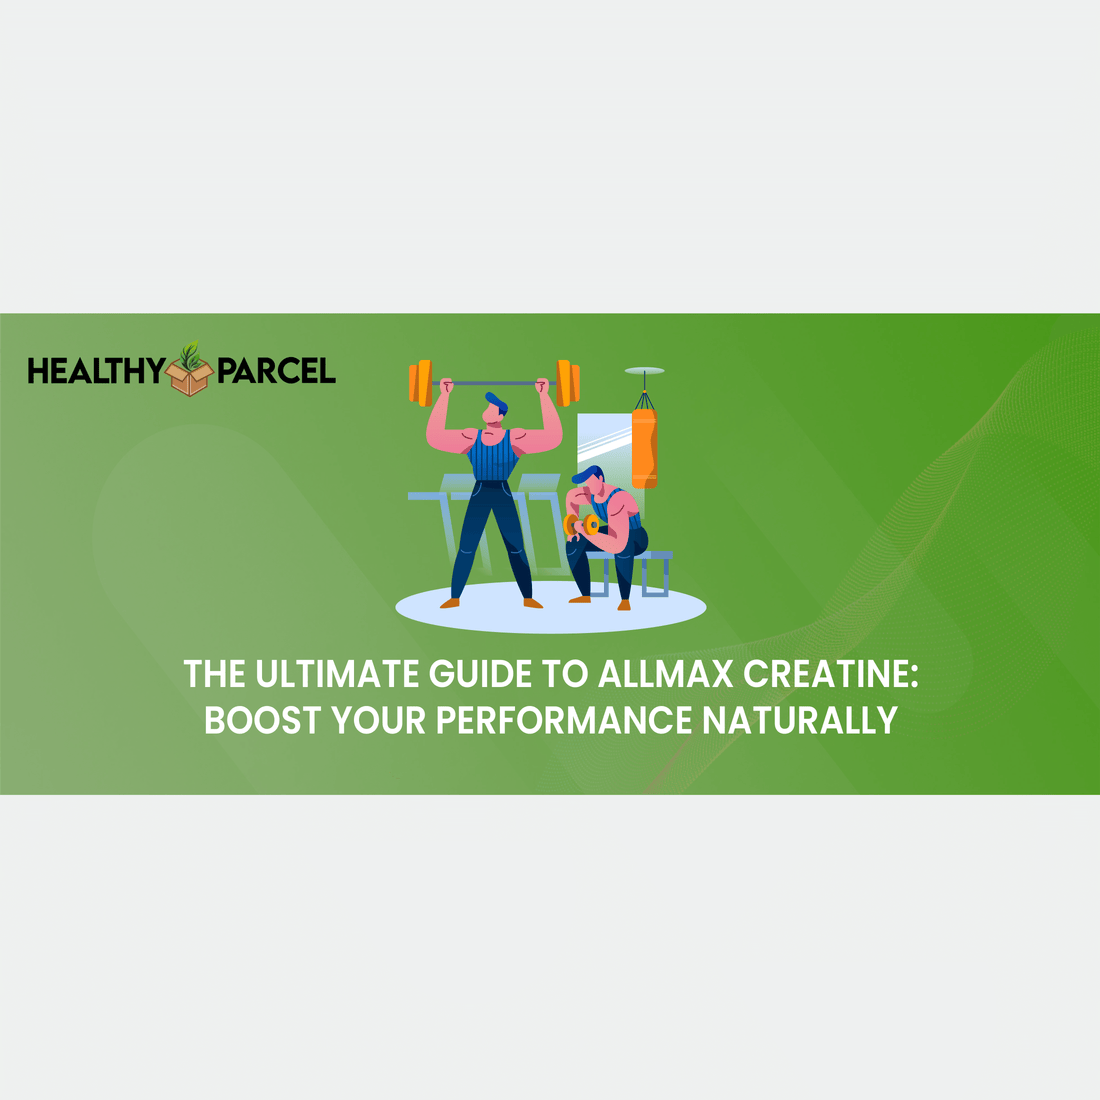 The Ultimate Guide to Allmax Creatine Boost Your Performance Naturally